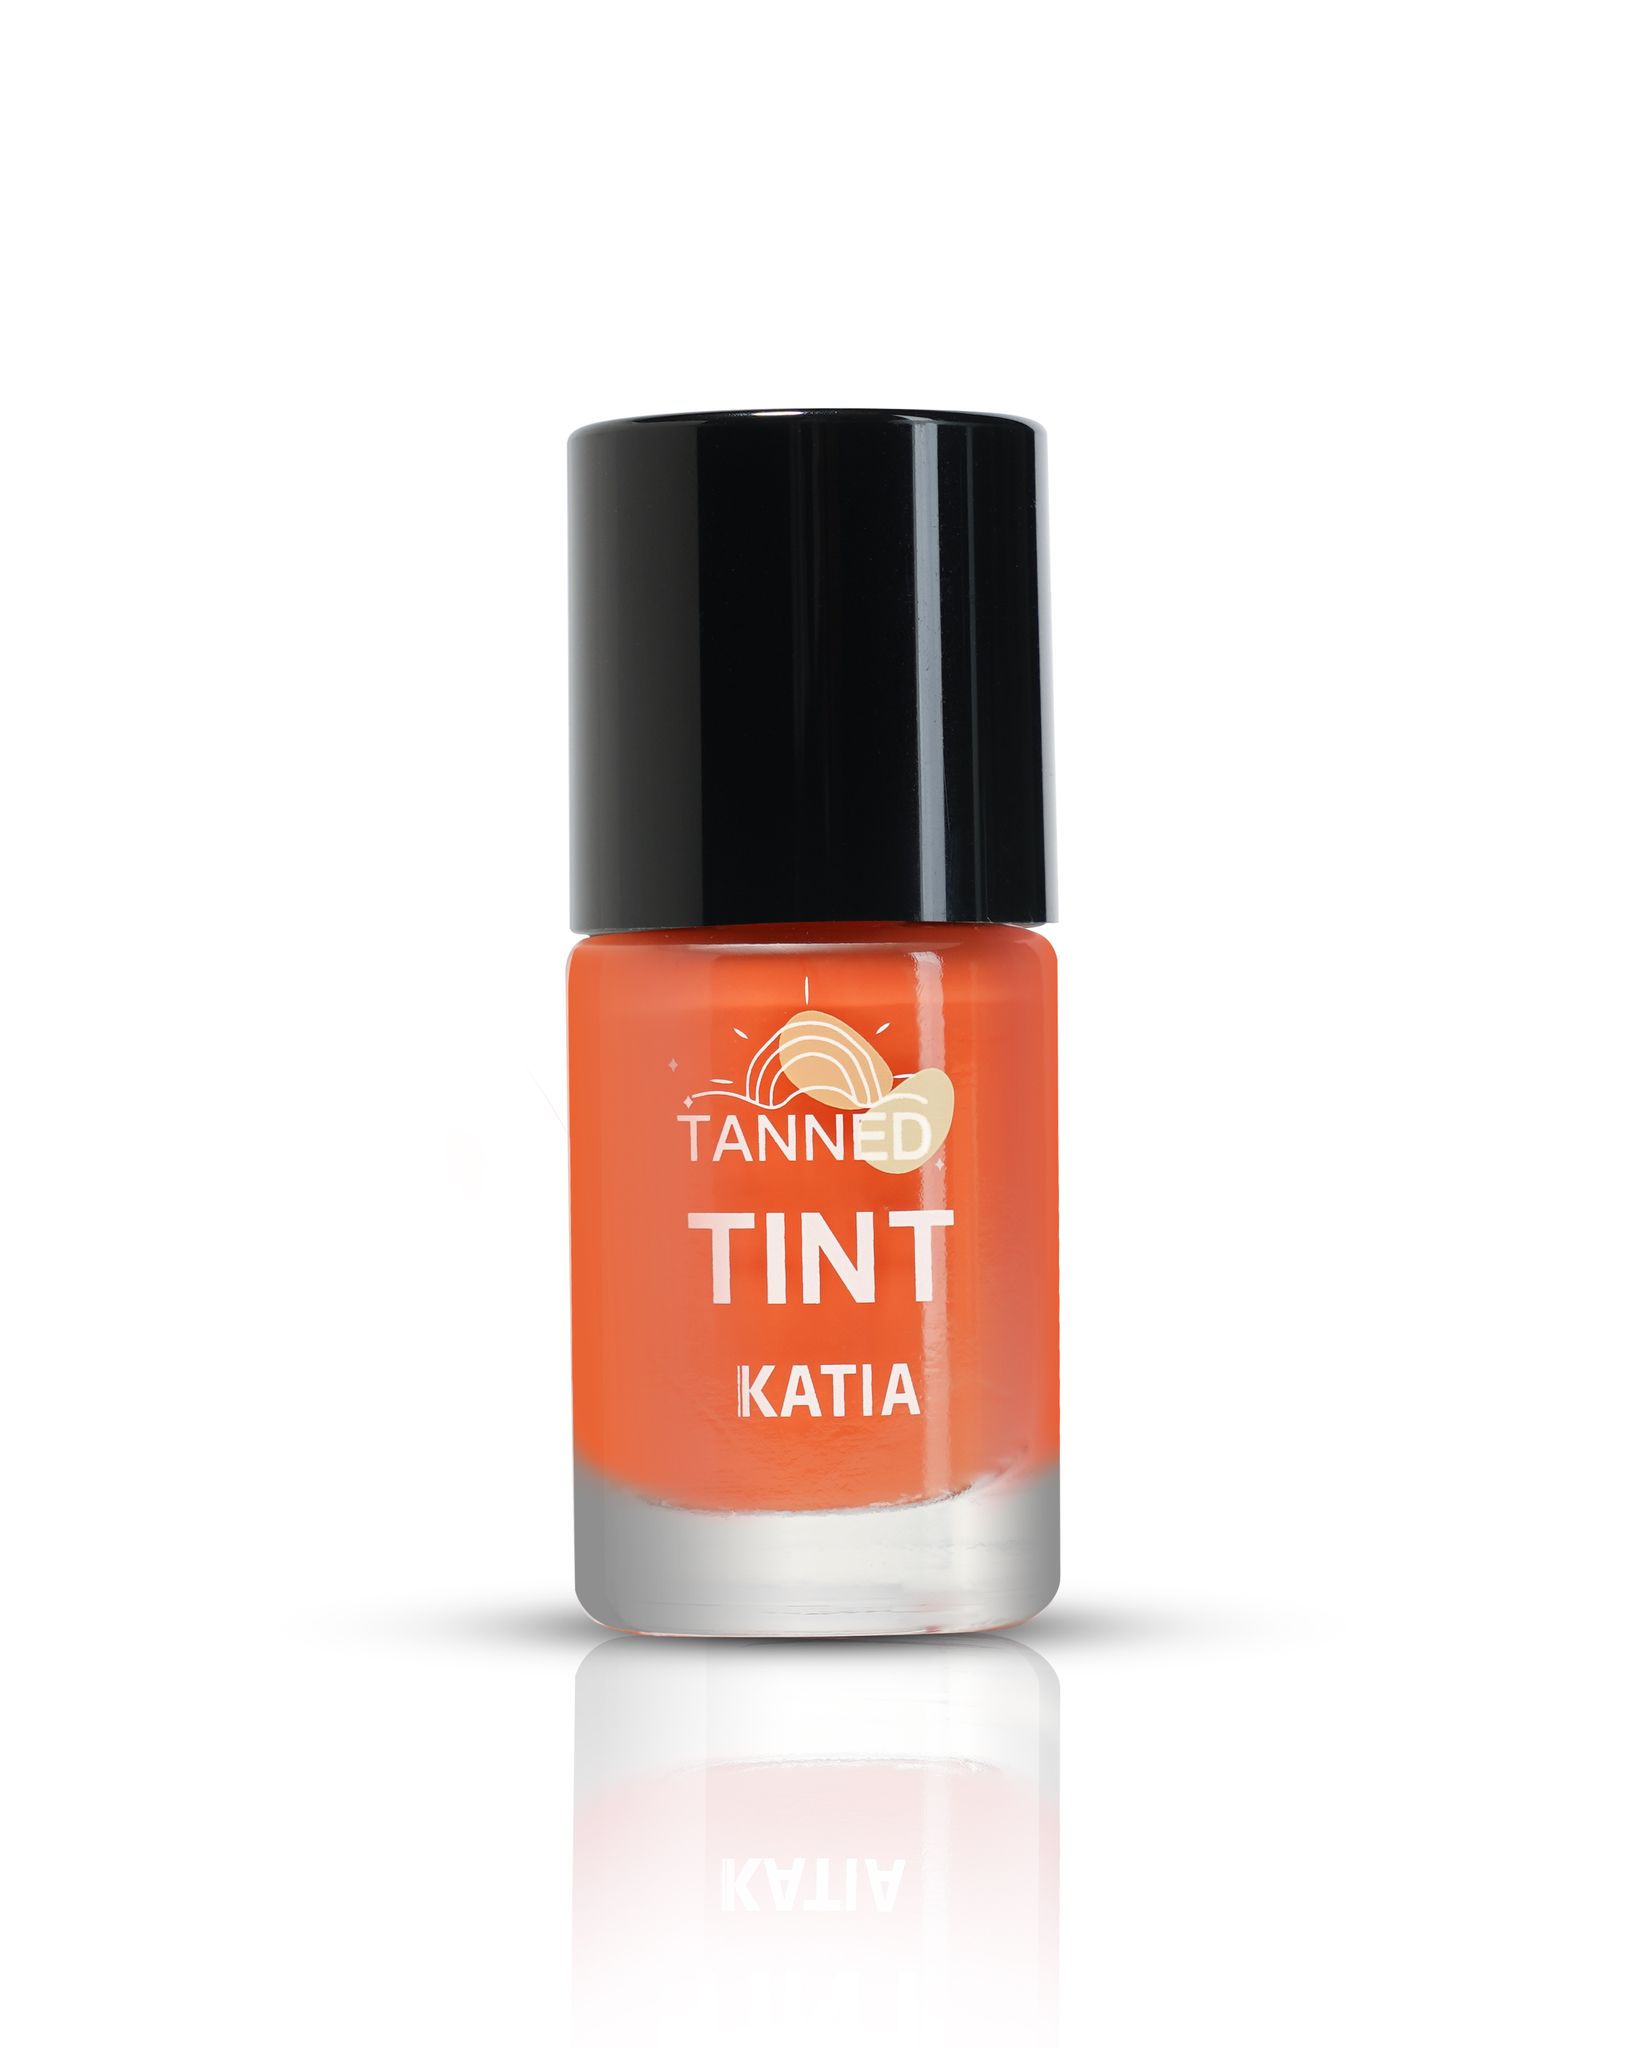 Tanned Cheeks and Lips Tint 12ml